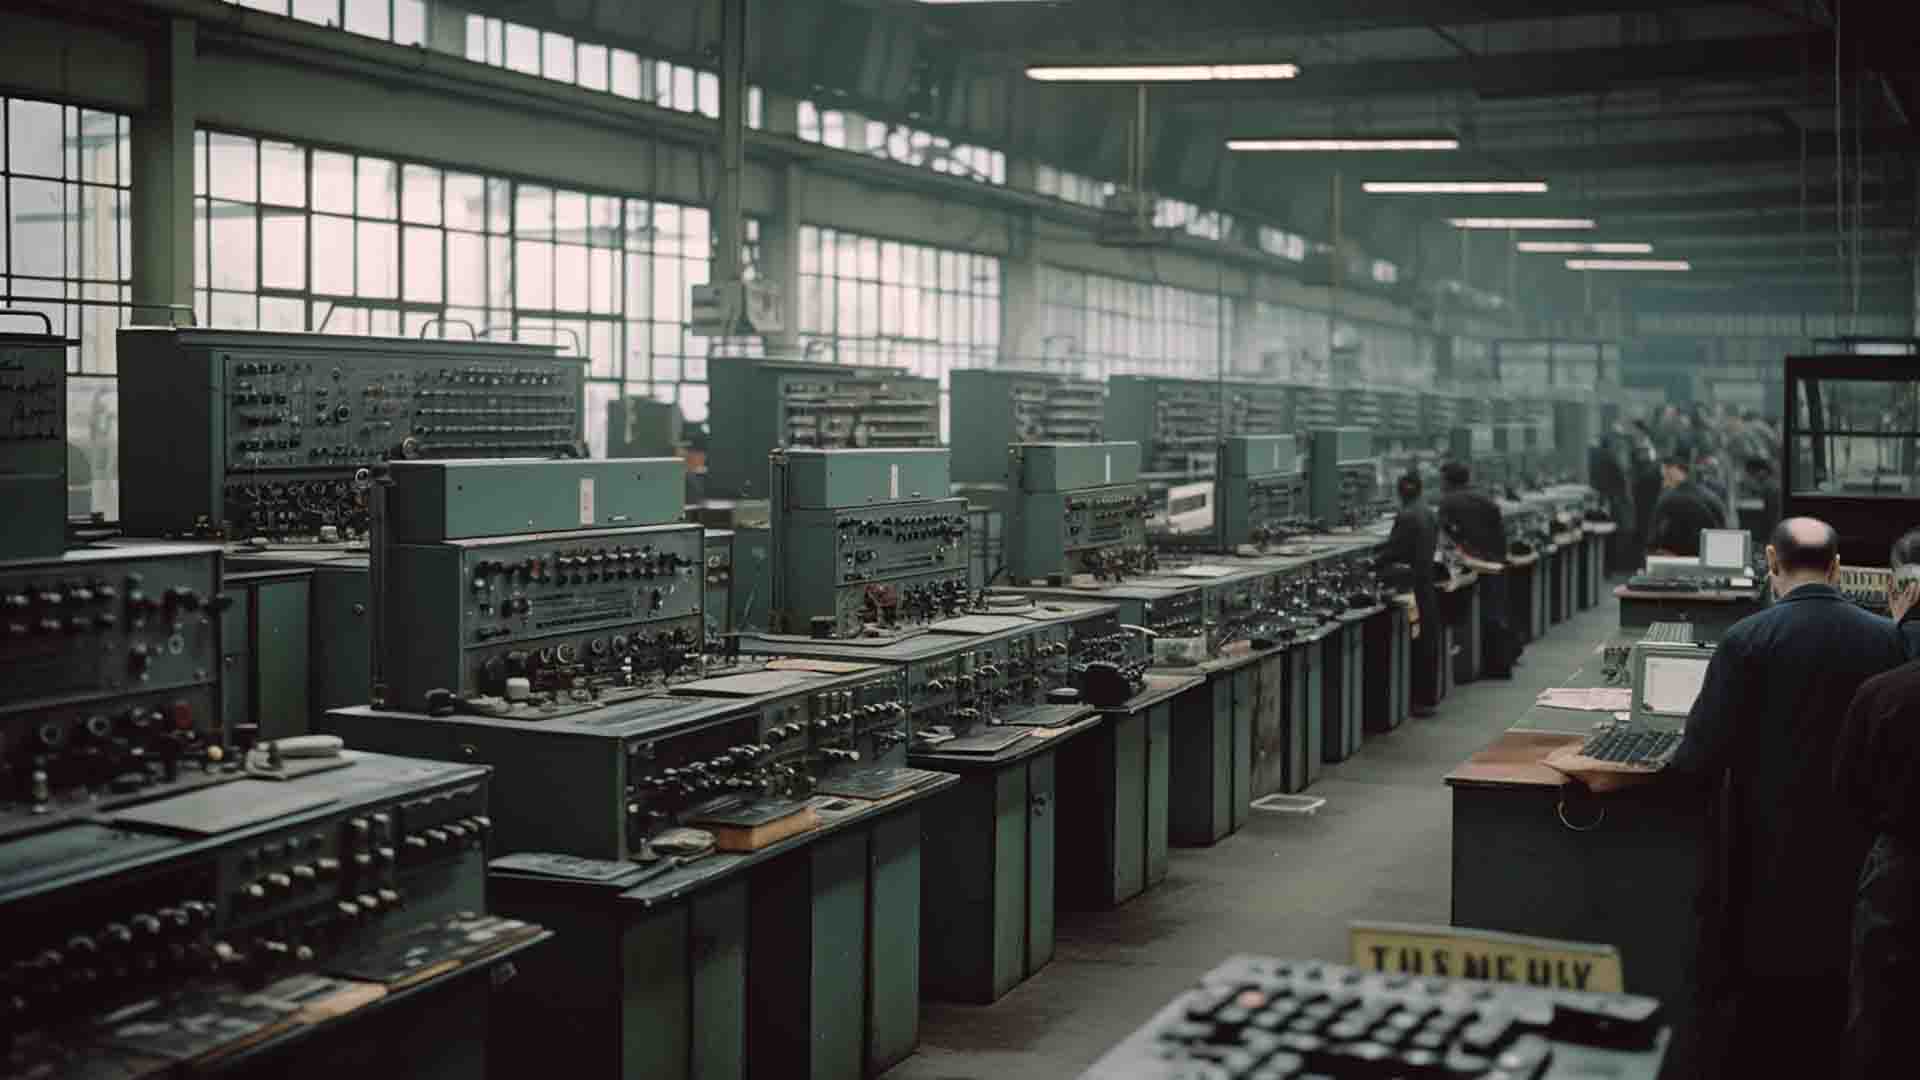 An assembly line in a factory, each station demonstrating a different method of argument reuse, showing the systematic and efficient nature of the process.